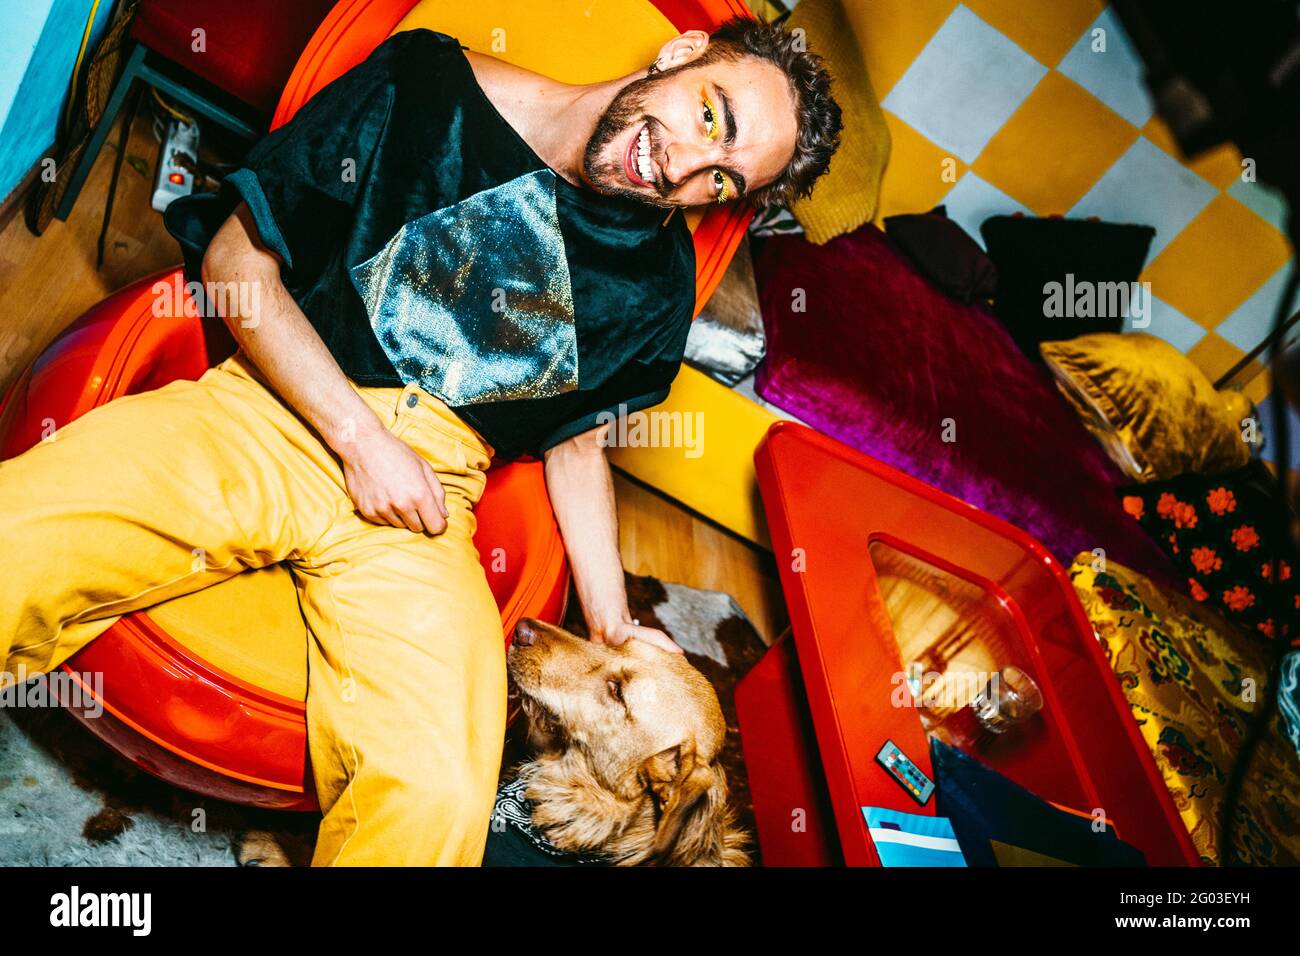 Portrait of smiling young man with dog in living room Stock Photo